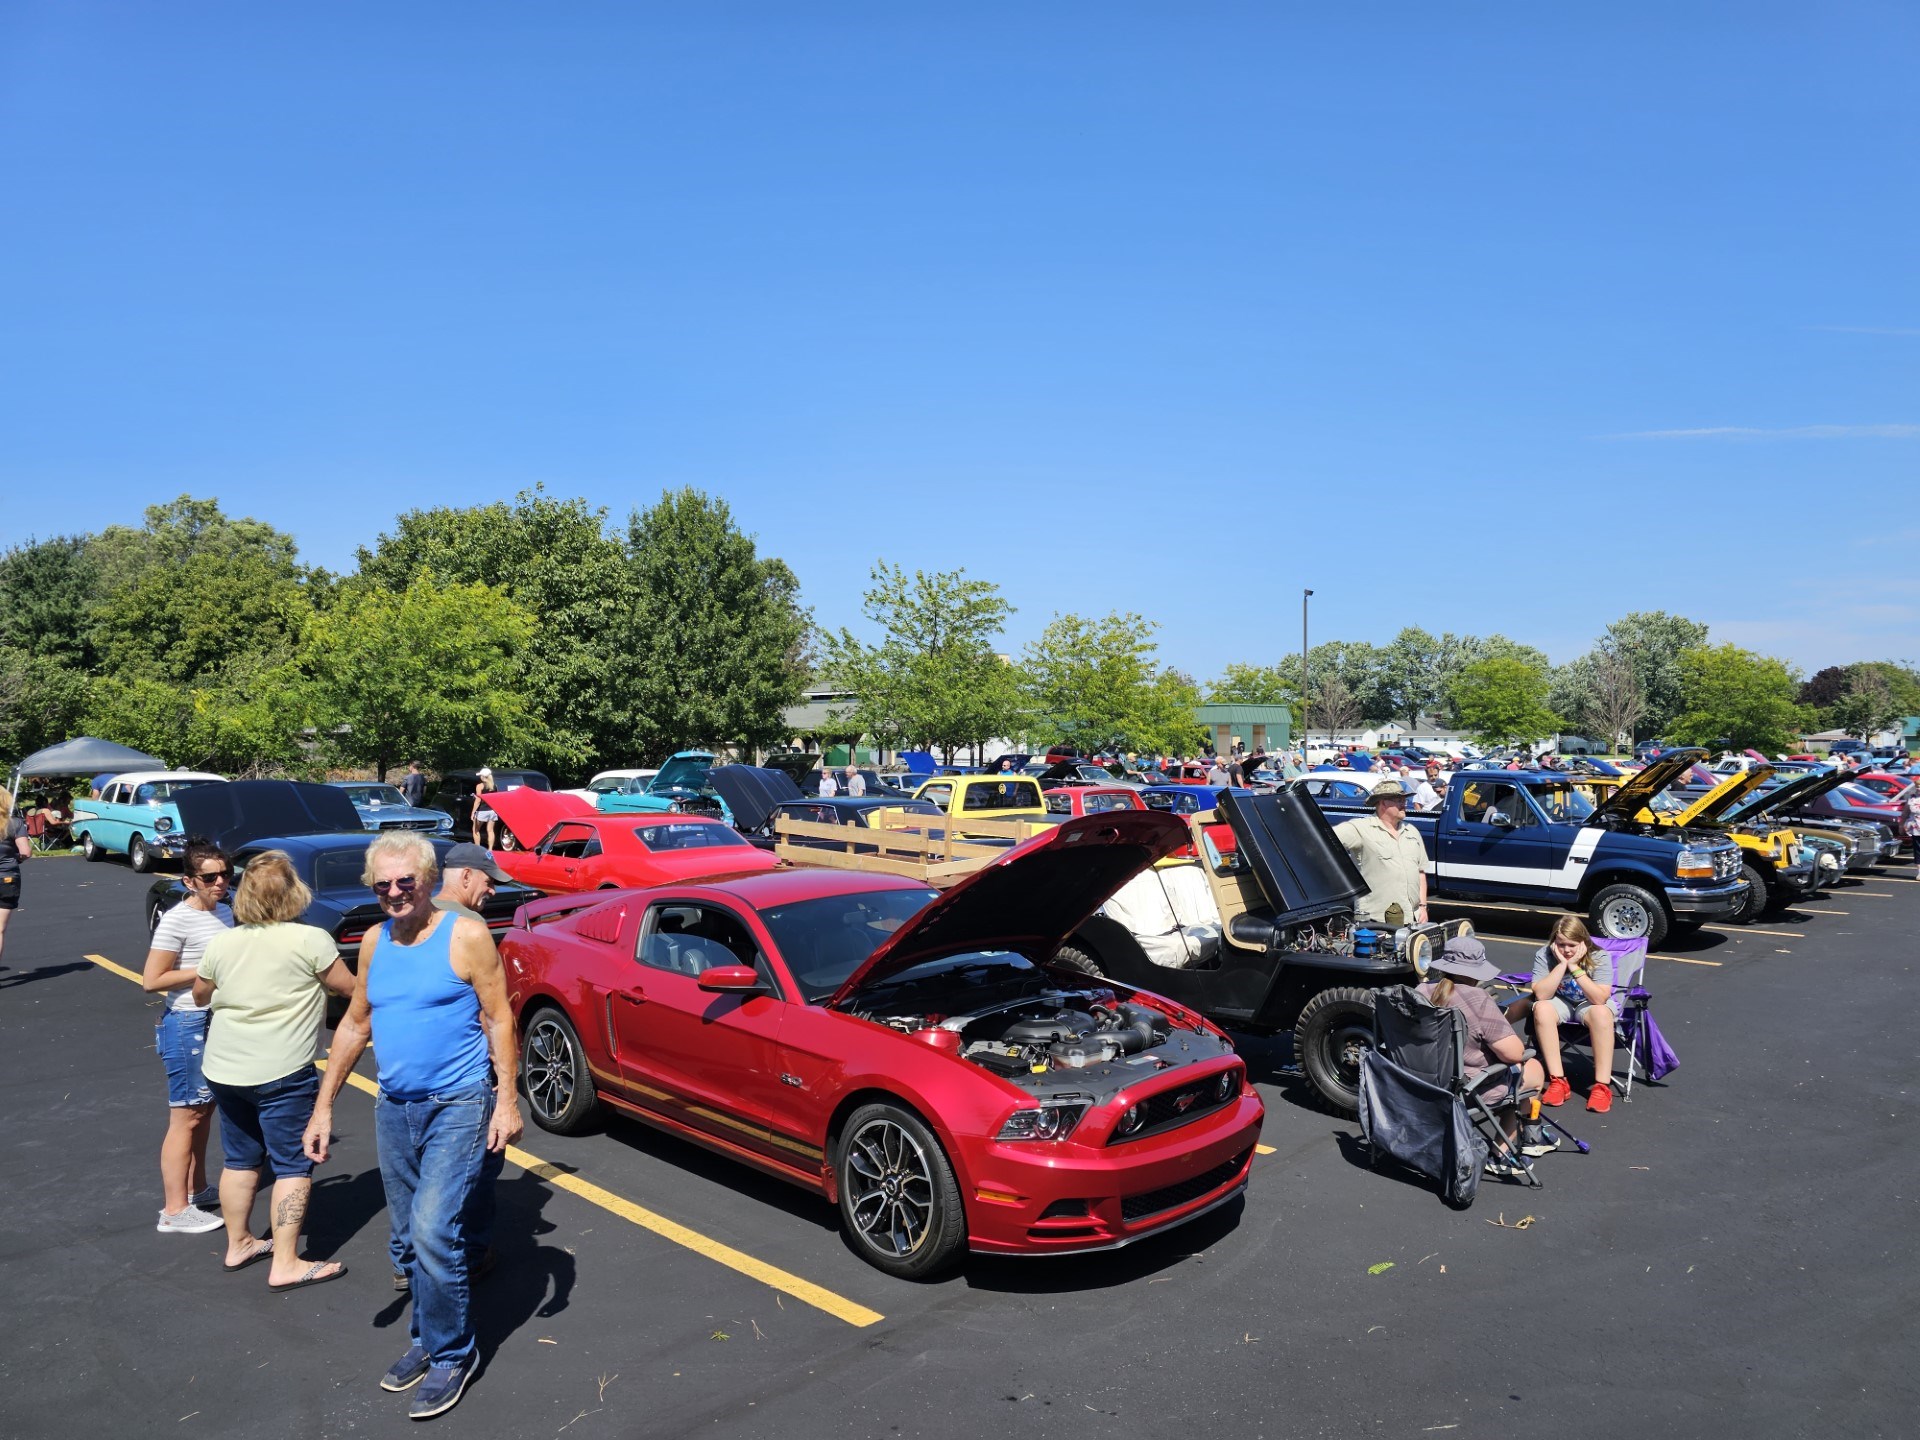 14th Annual Cruisin' for a Cause Returns to Church of God in August